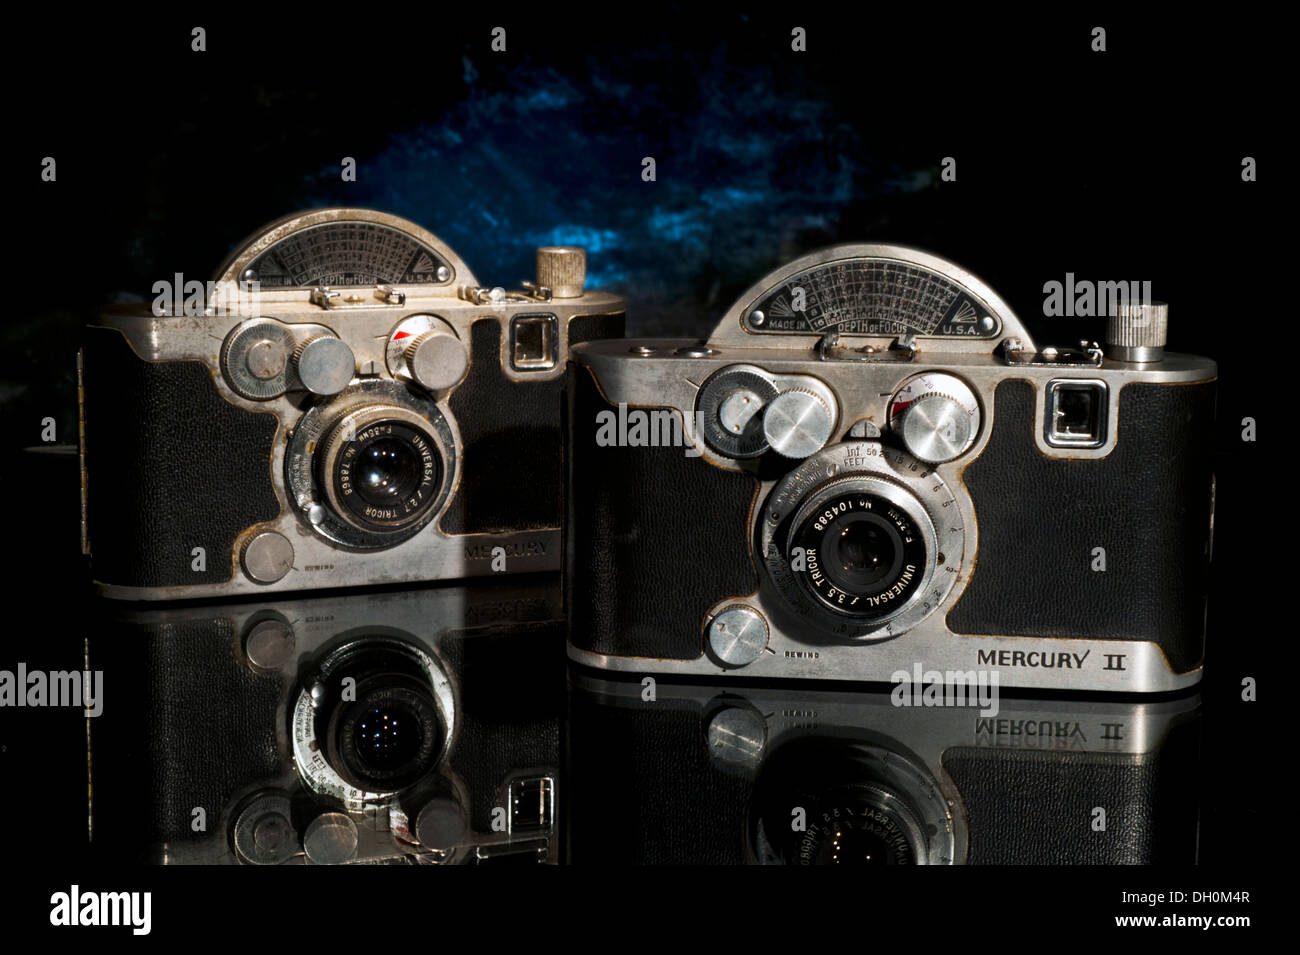 Two vintage 1940's and 1950's Mercury II film cameras with dark background & reflection Stock Photo